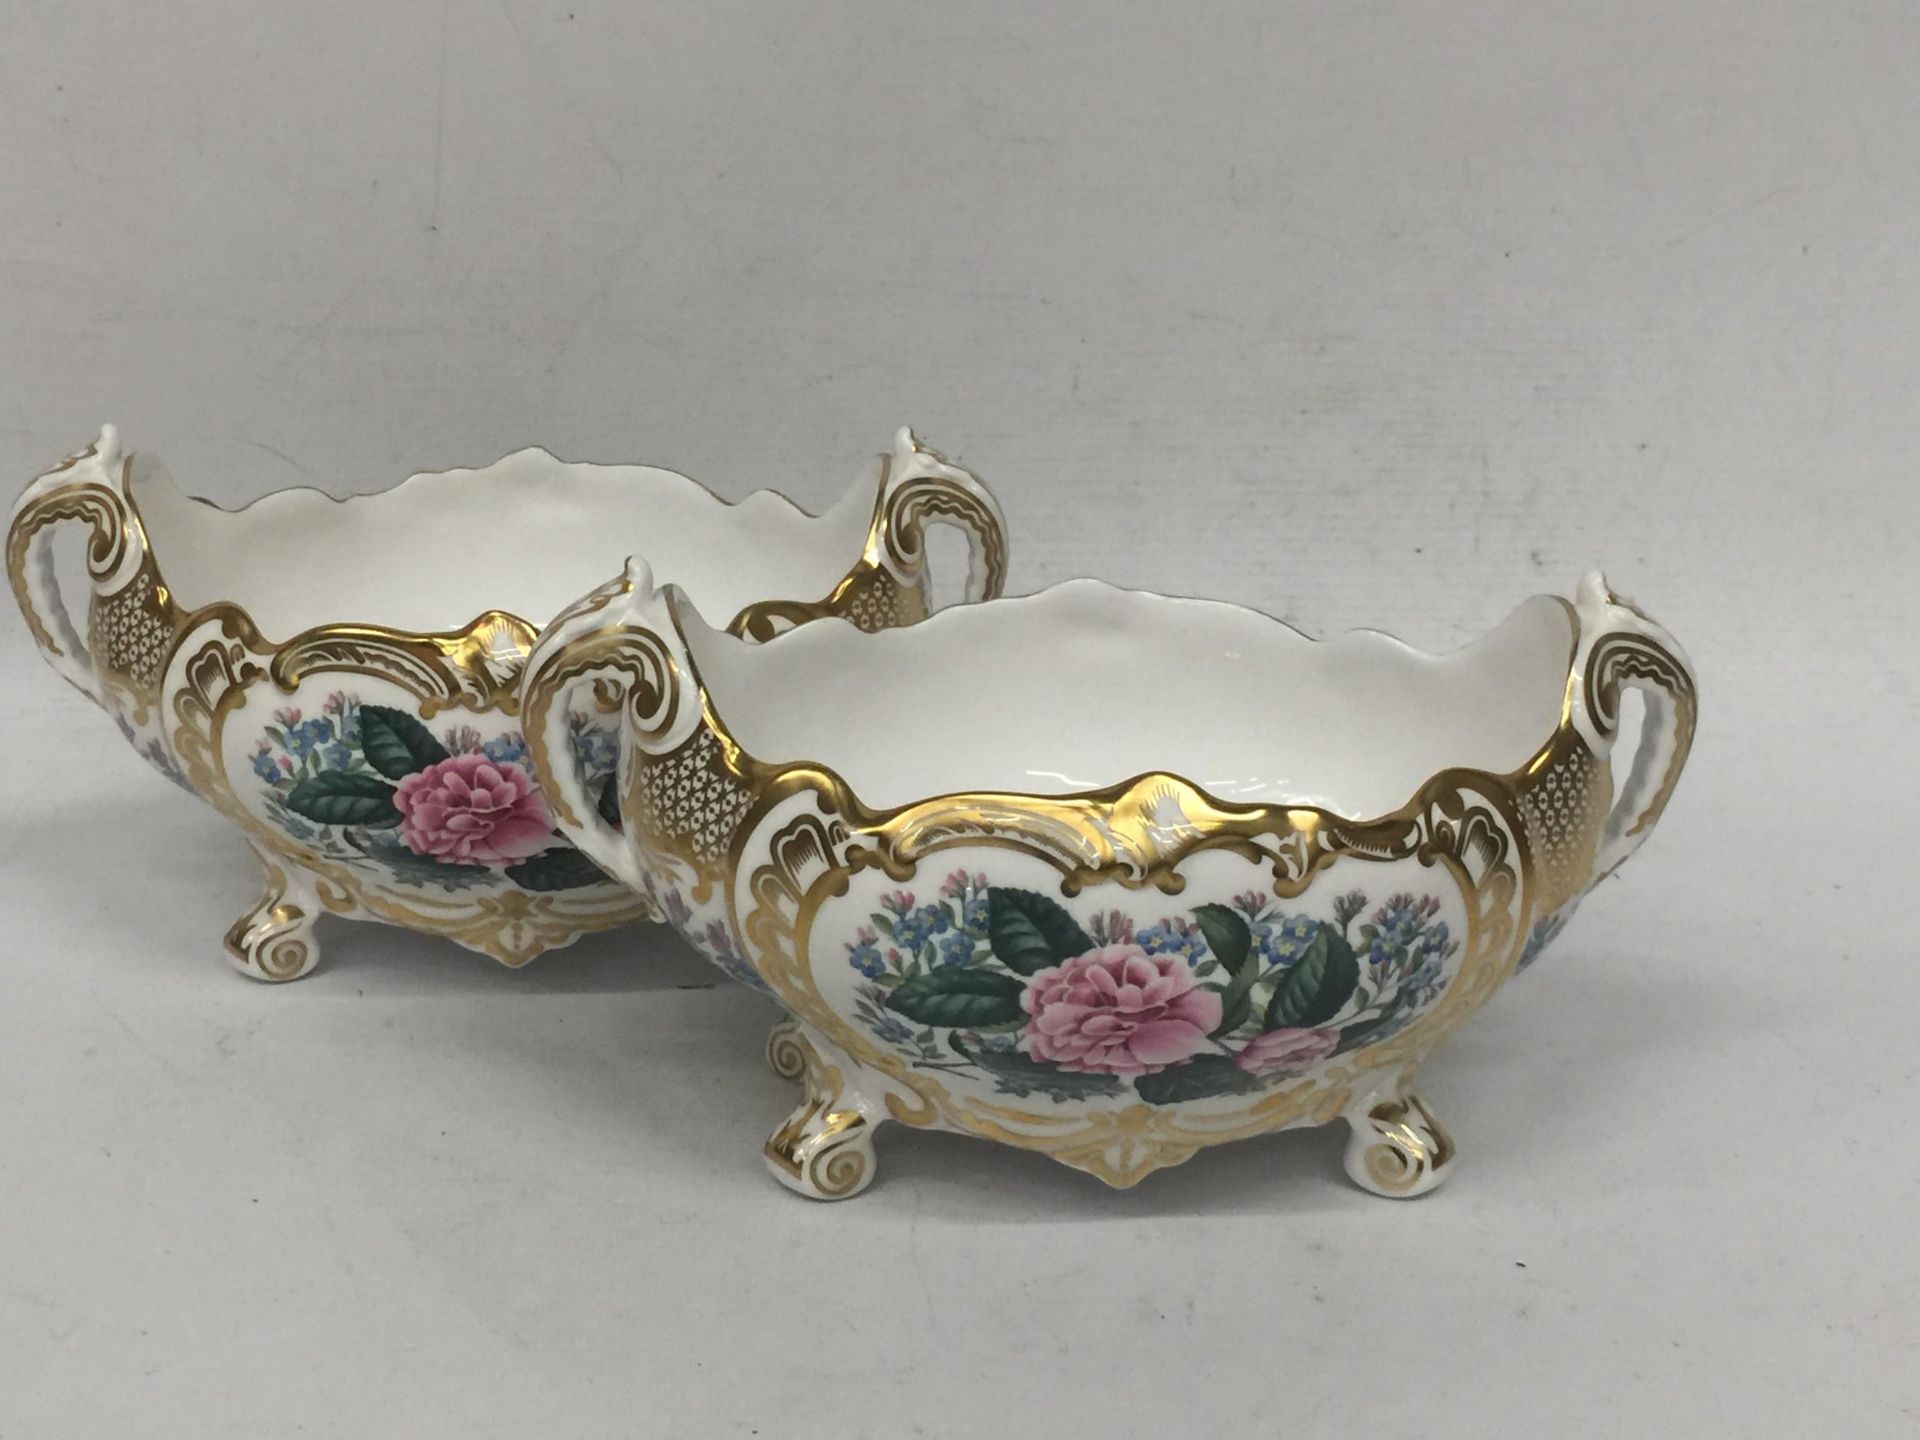 A PAIR OF SPODE 'SPODE TREASURES' LIMITED EDITION TWIN HANDLED BOWLS